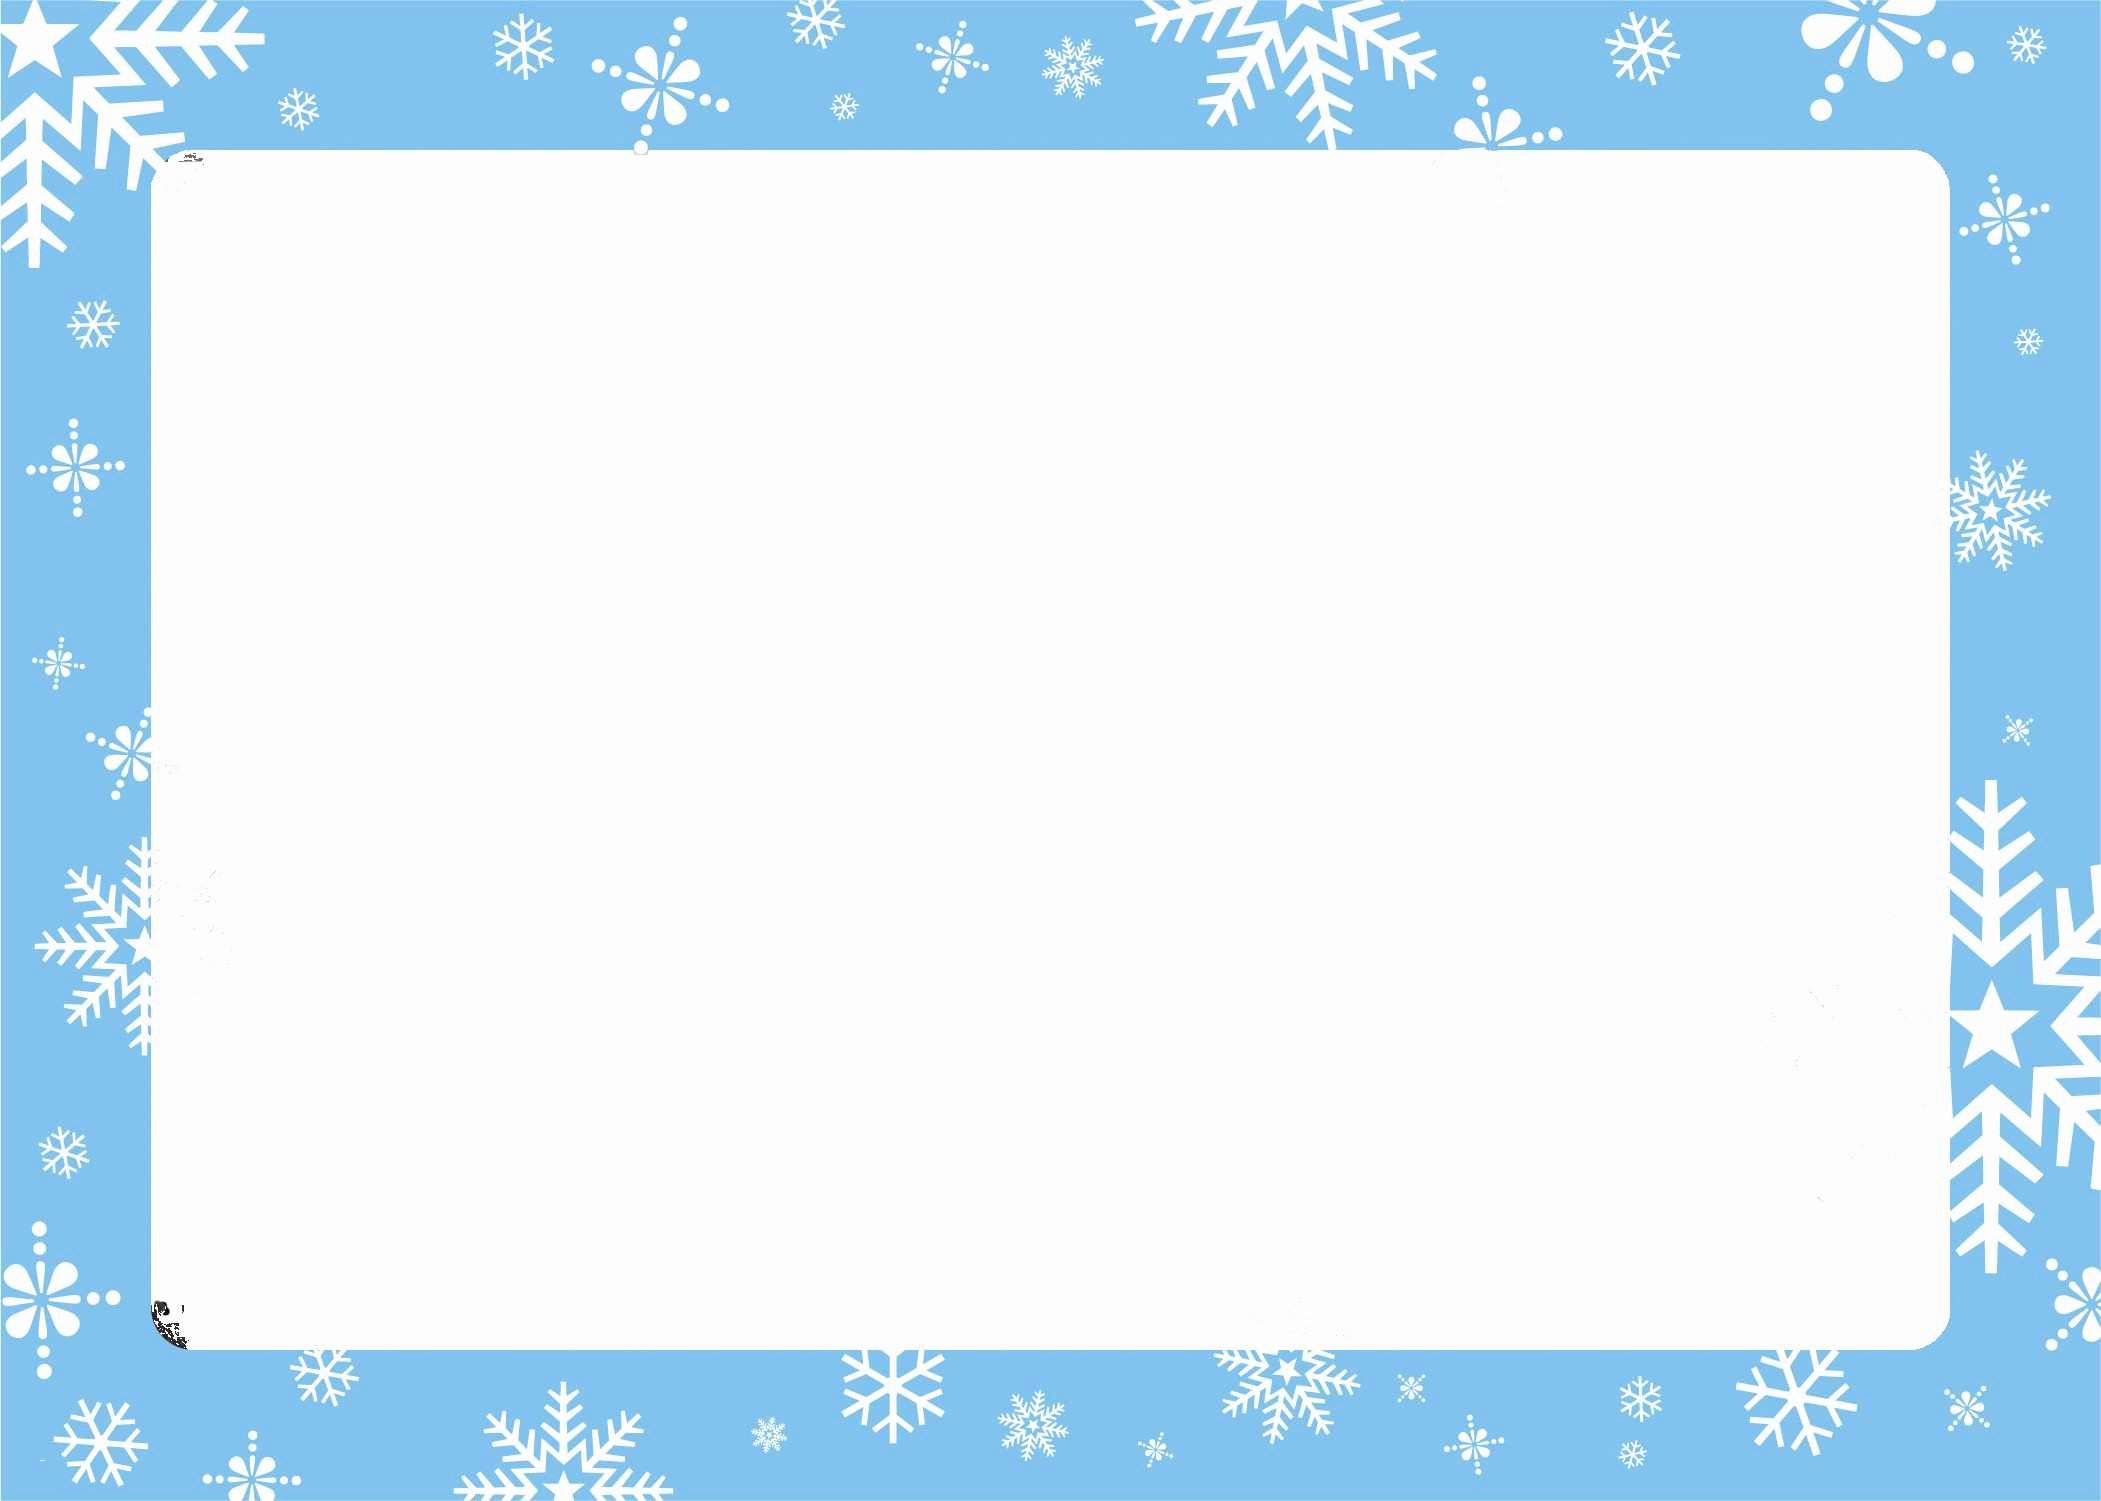 Greeting Card Template Photoshop Awesome Lovely Free 5x7 Christmas Card Templates for Shop